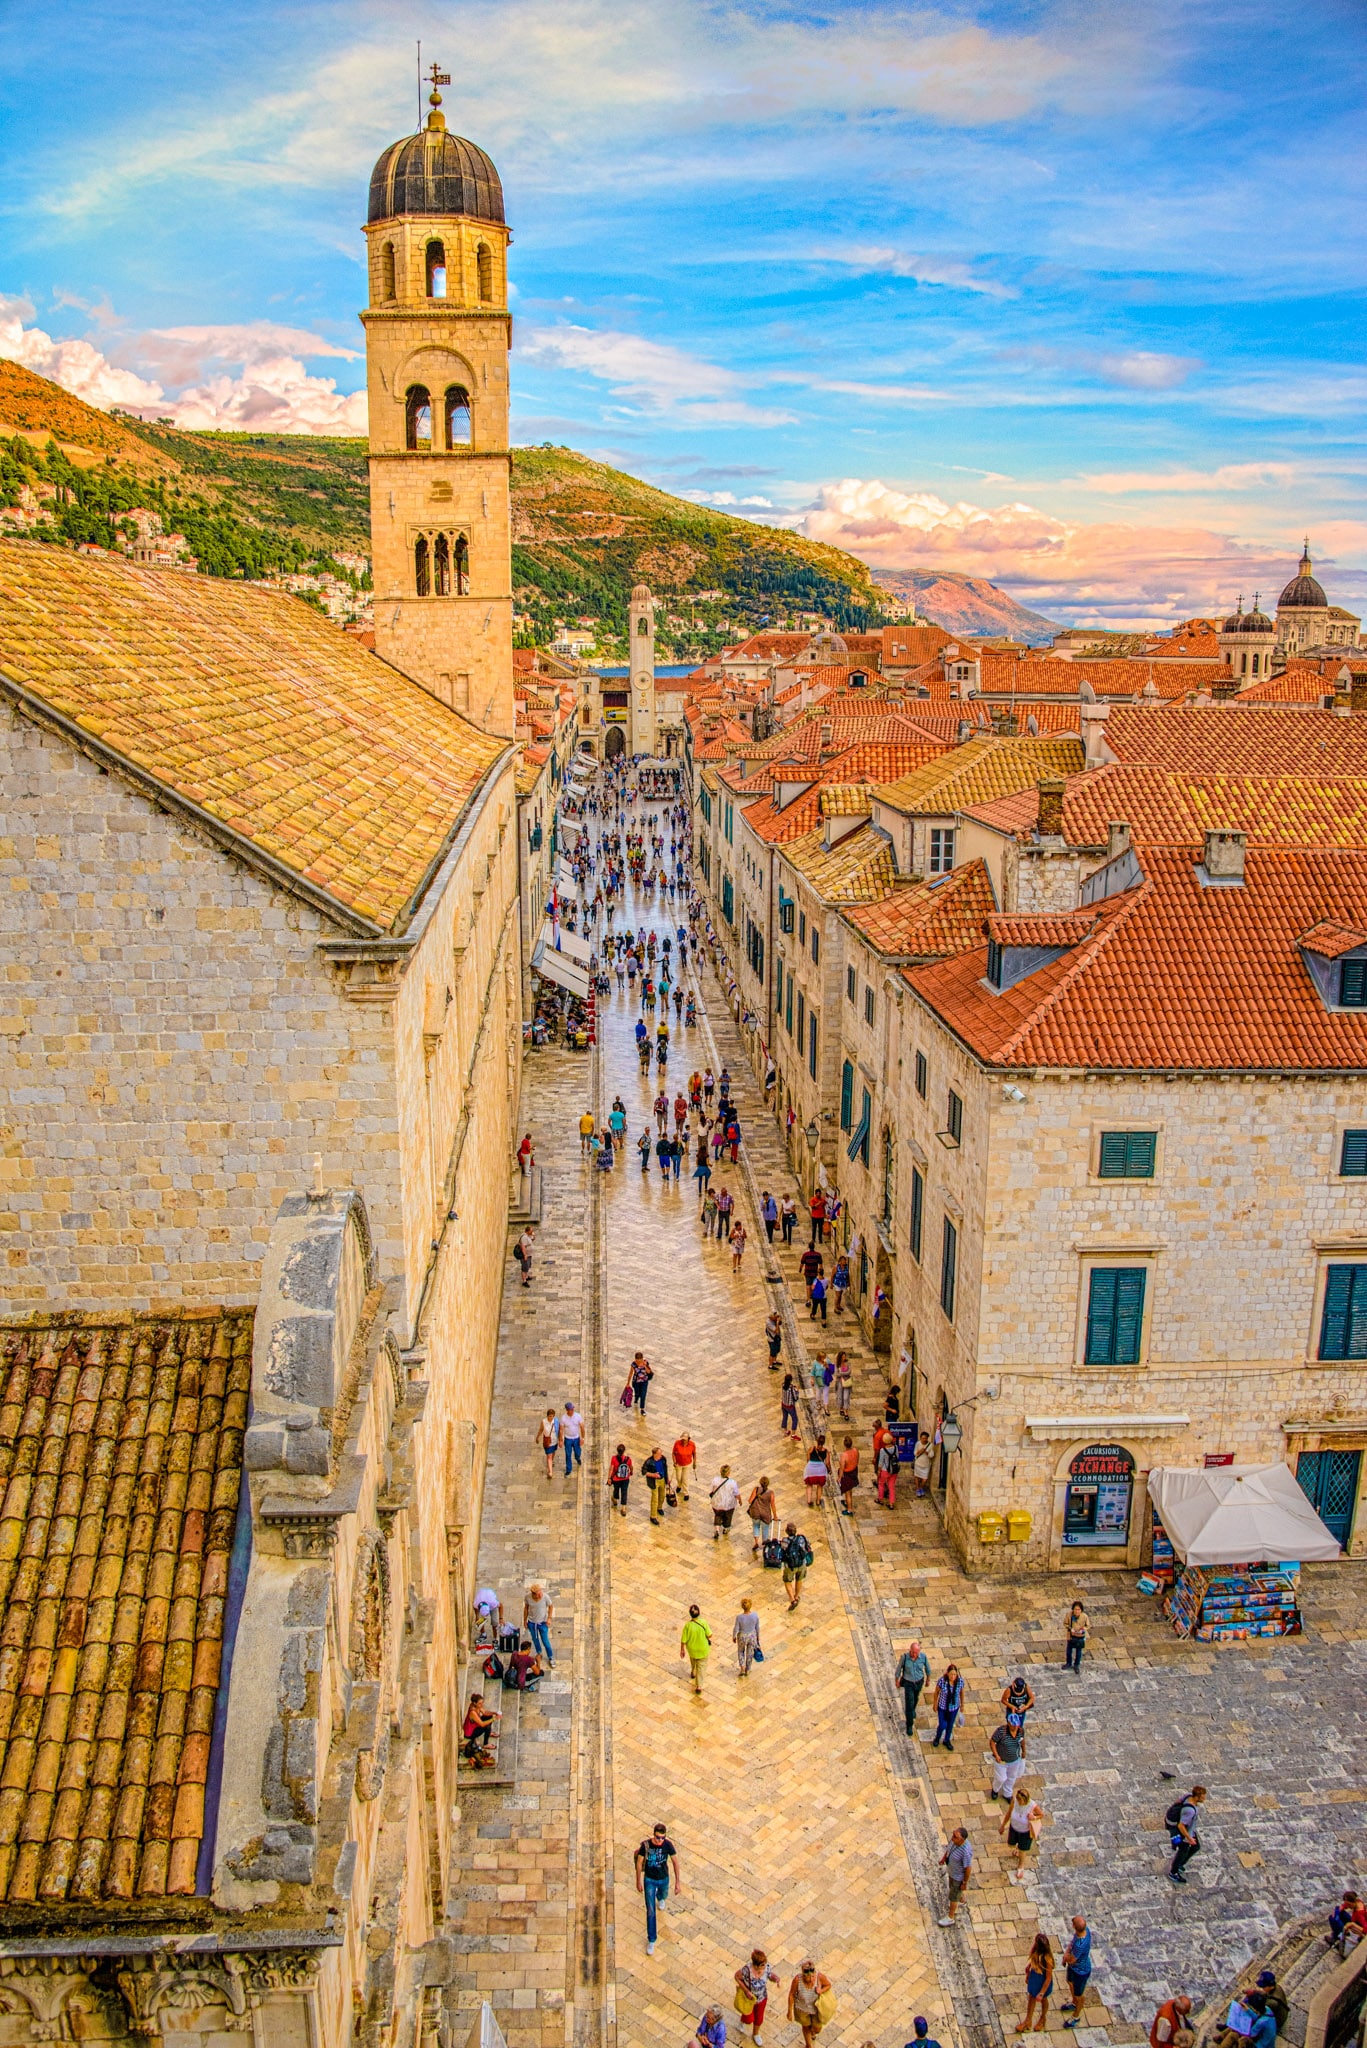 A view from Dubrovnik's city wall looking down the Stradum to the Dubrovnik Clock Tower in the distance and the Franciscan Church bell tower to the left.